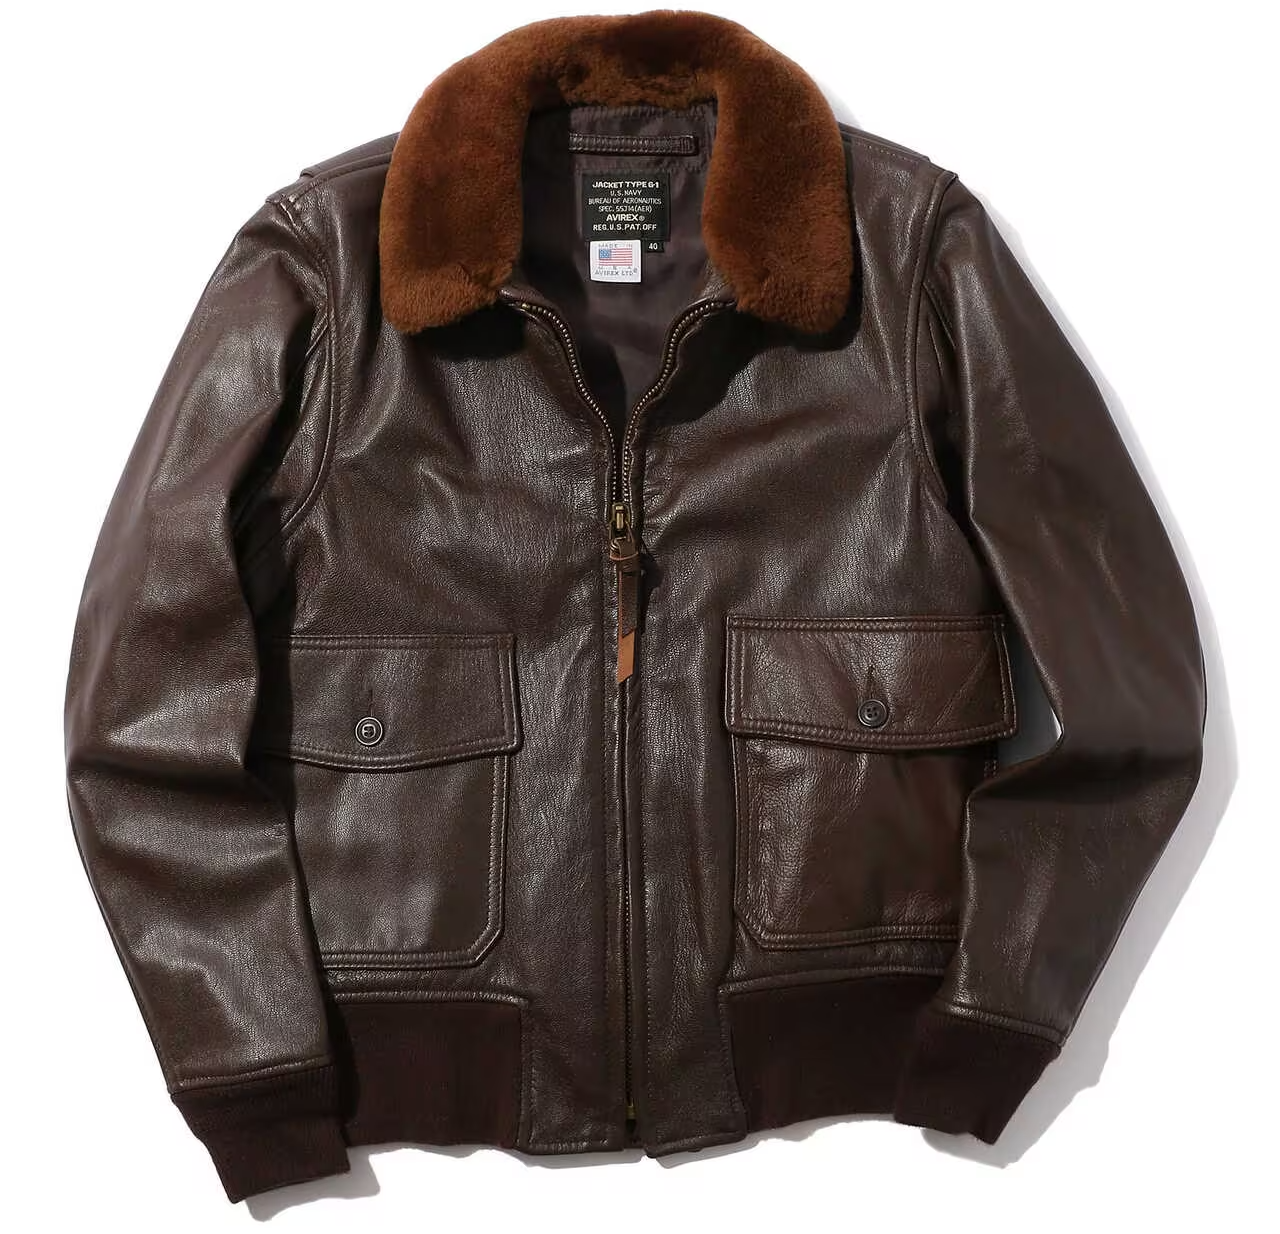 The supreme leather jacket from Avilex! What is the appeal of the